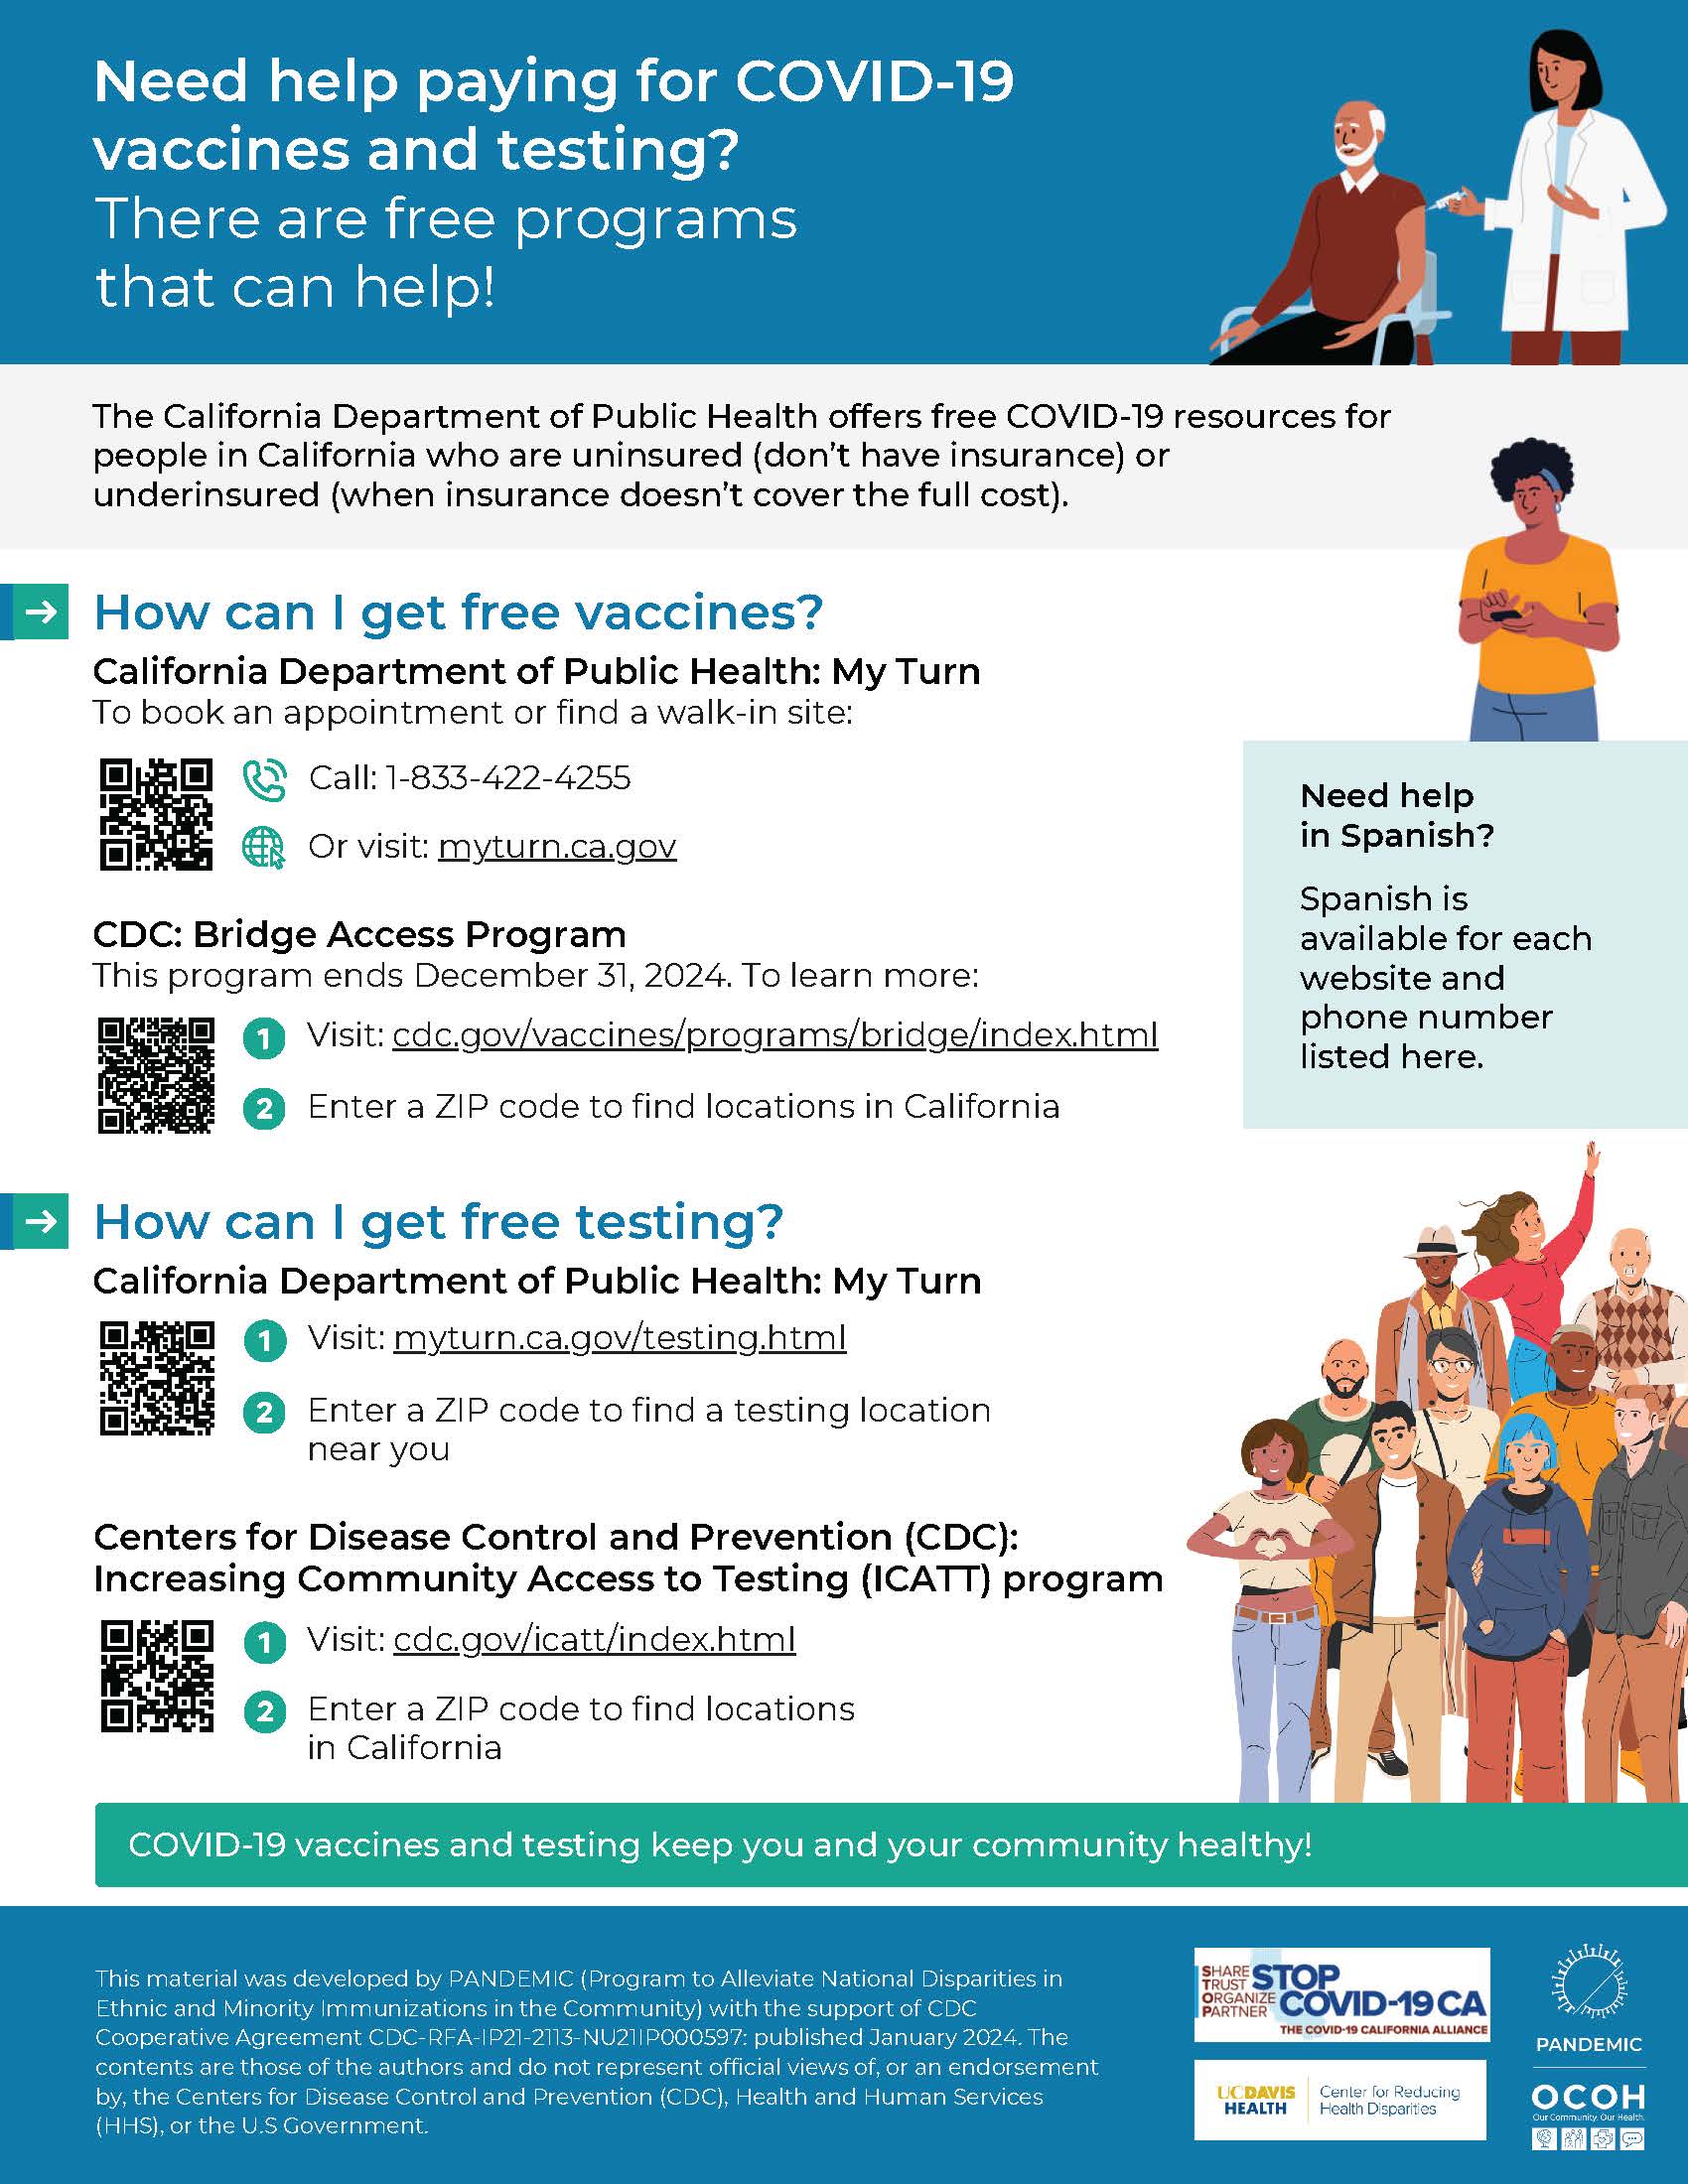 CEAL Flyer for COVID Vaccine and Testing information